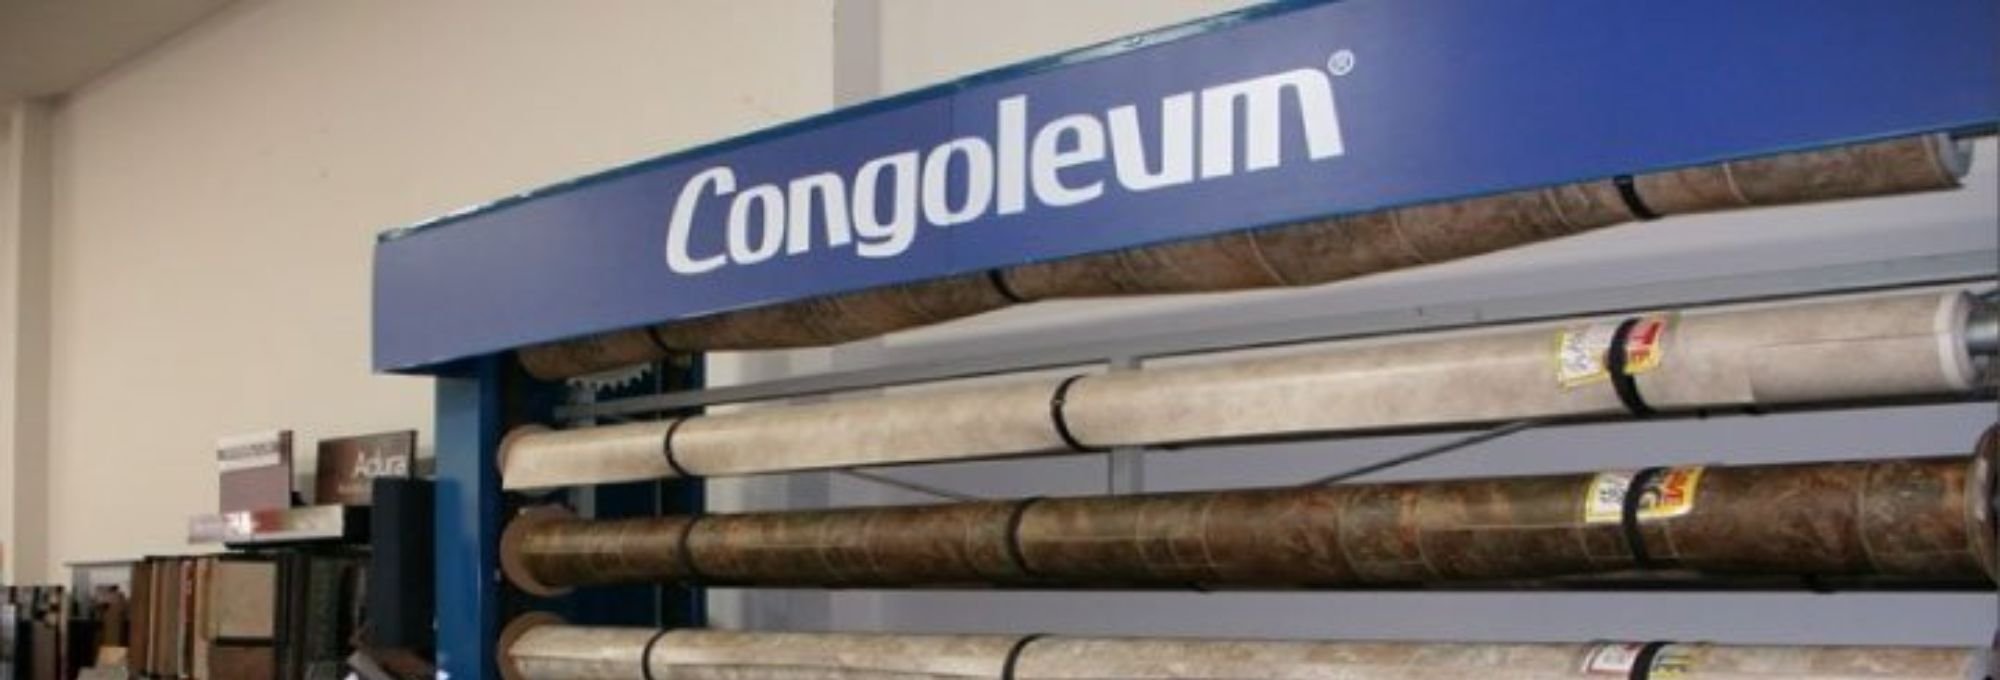 Congoleum stand from Carpet Plus in the Worthington, MN area